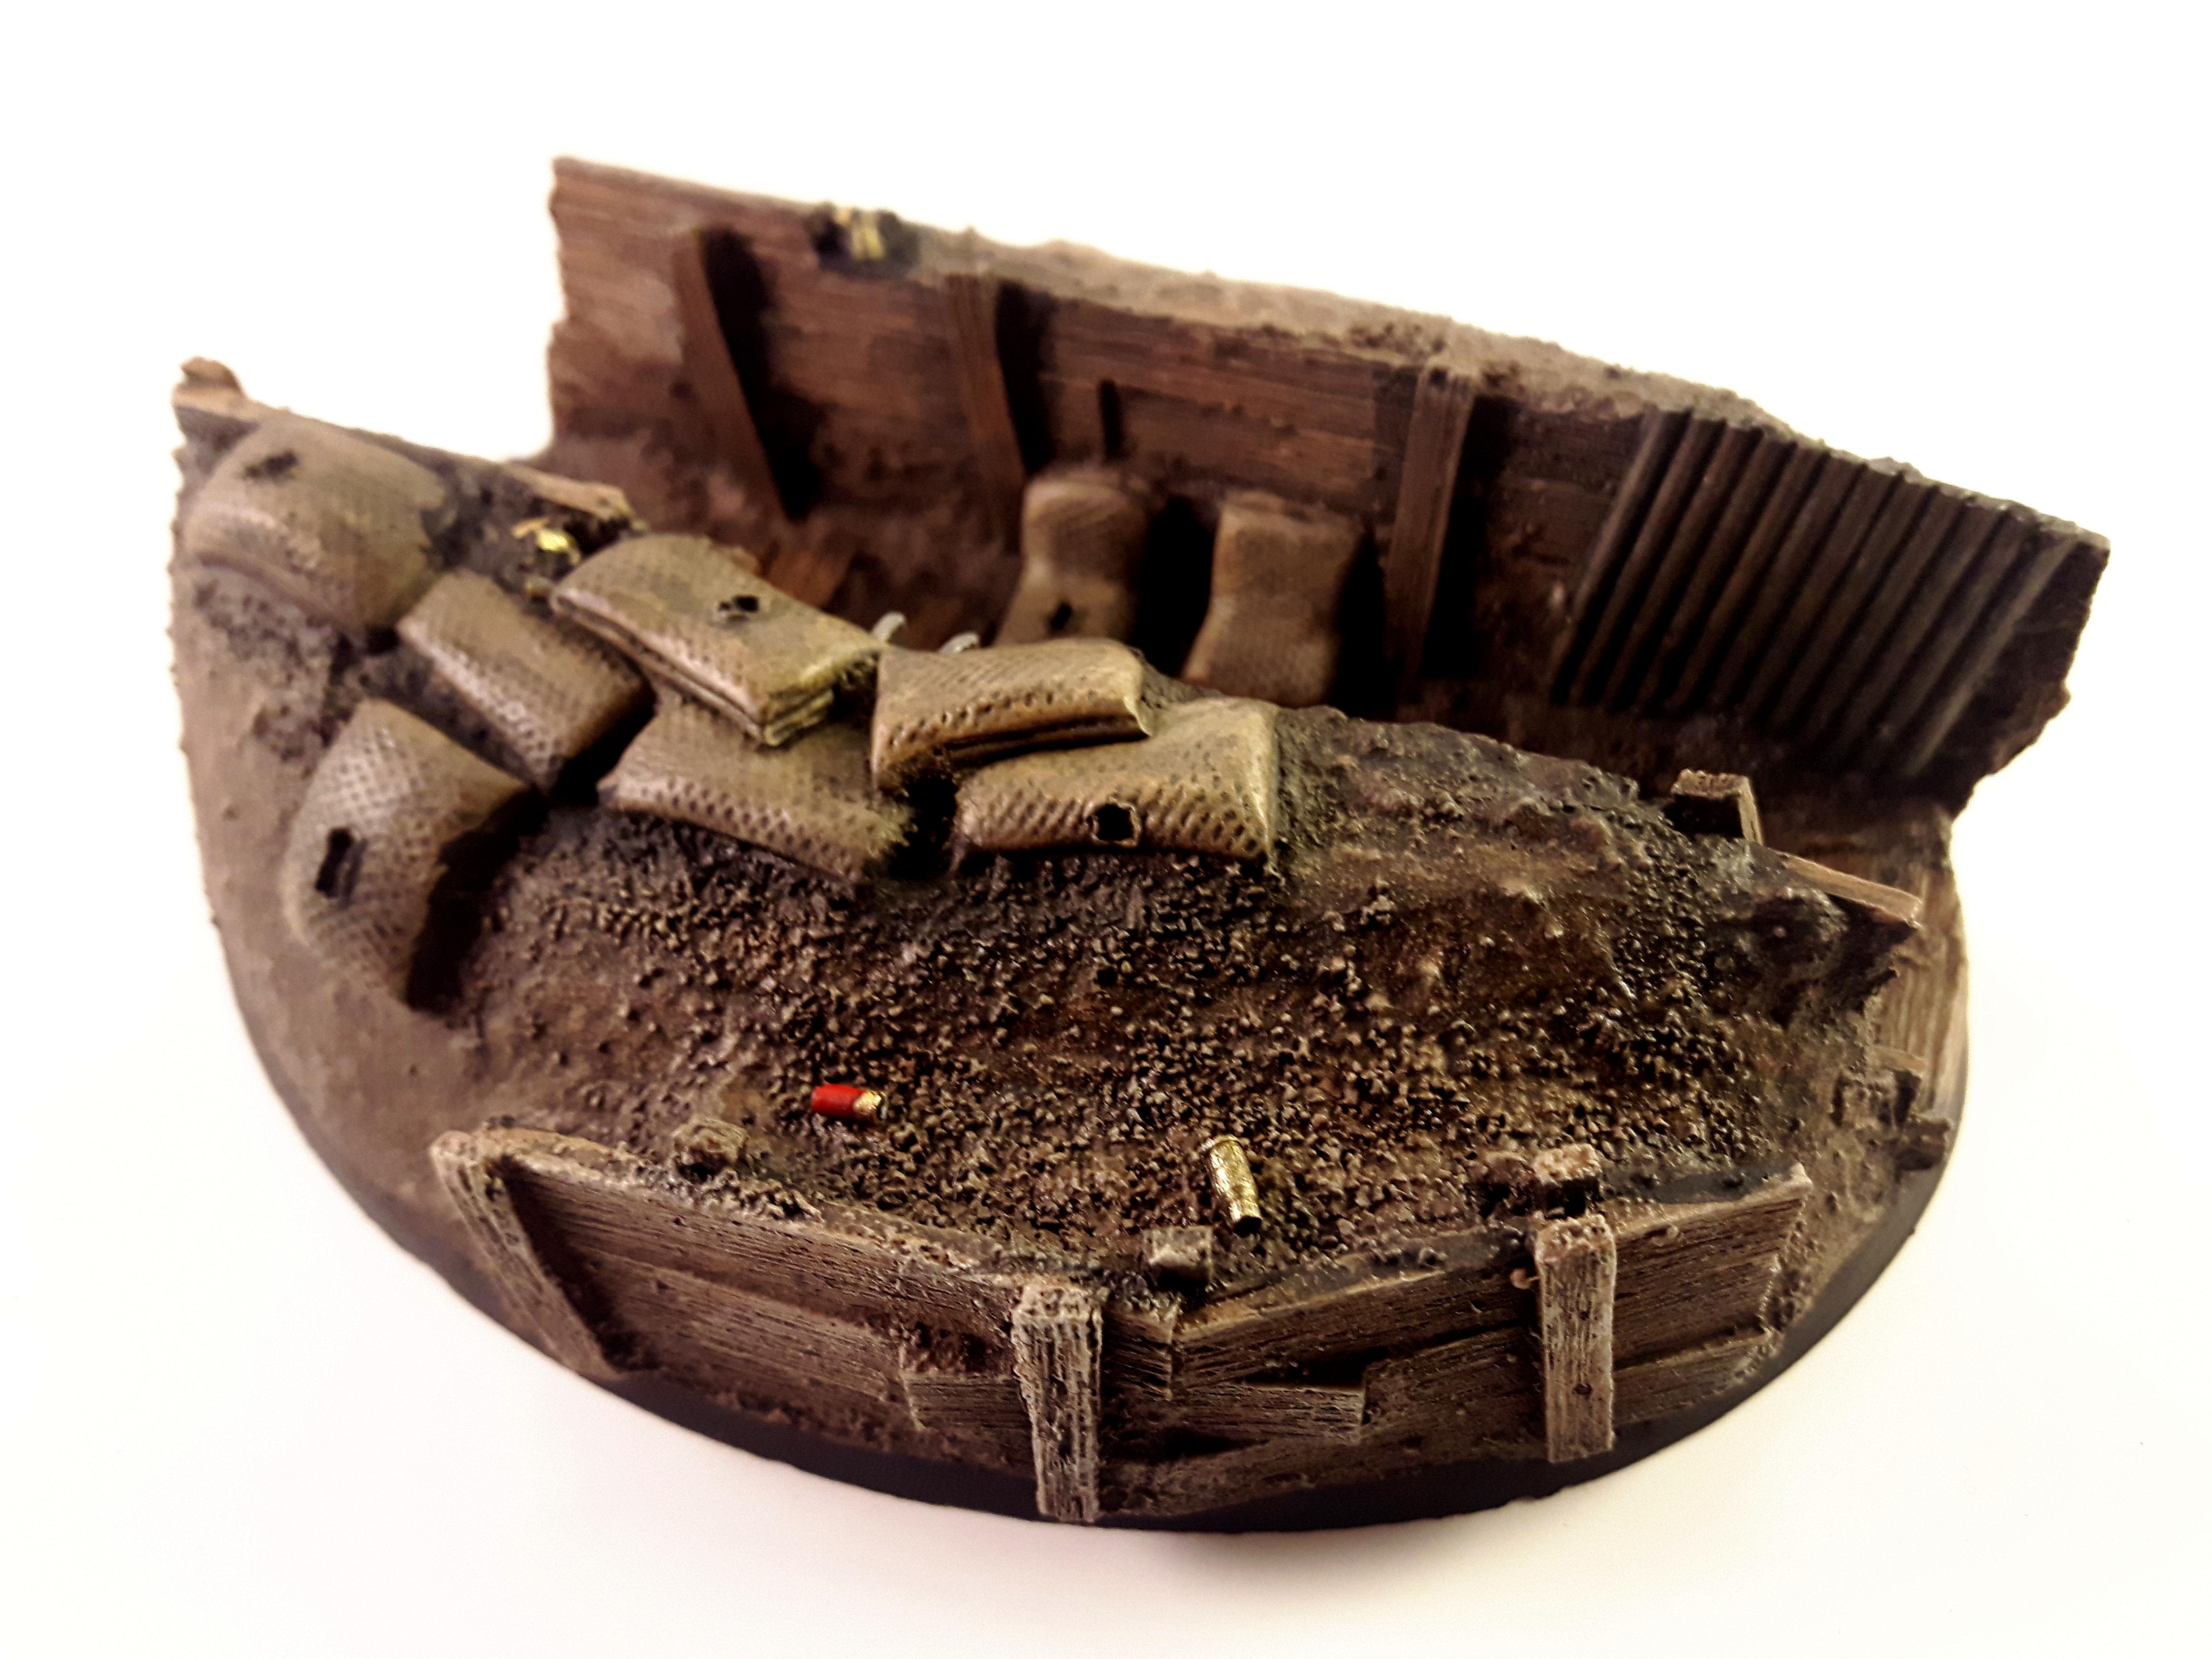 120mm, Astra Militarum, Base, Flying, Games Workshop, Imperial Guard, Oval, Resin, Trench, Warhammer 40,000